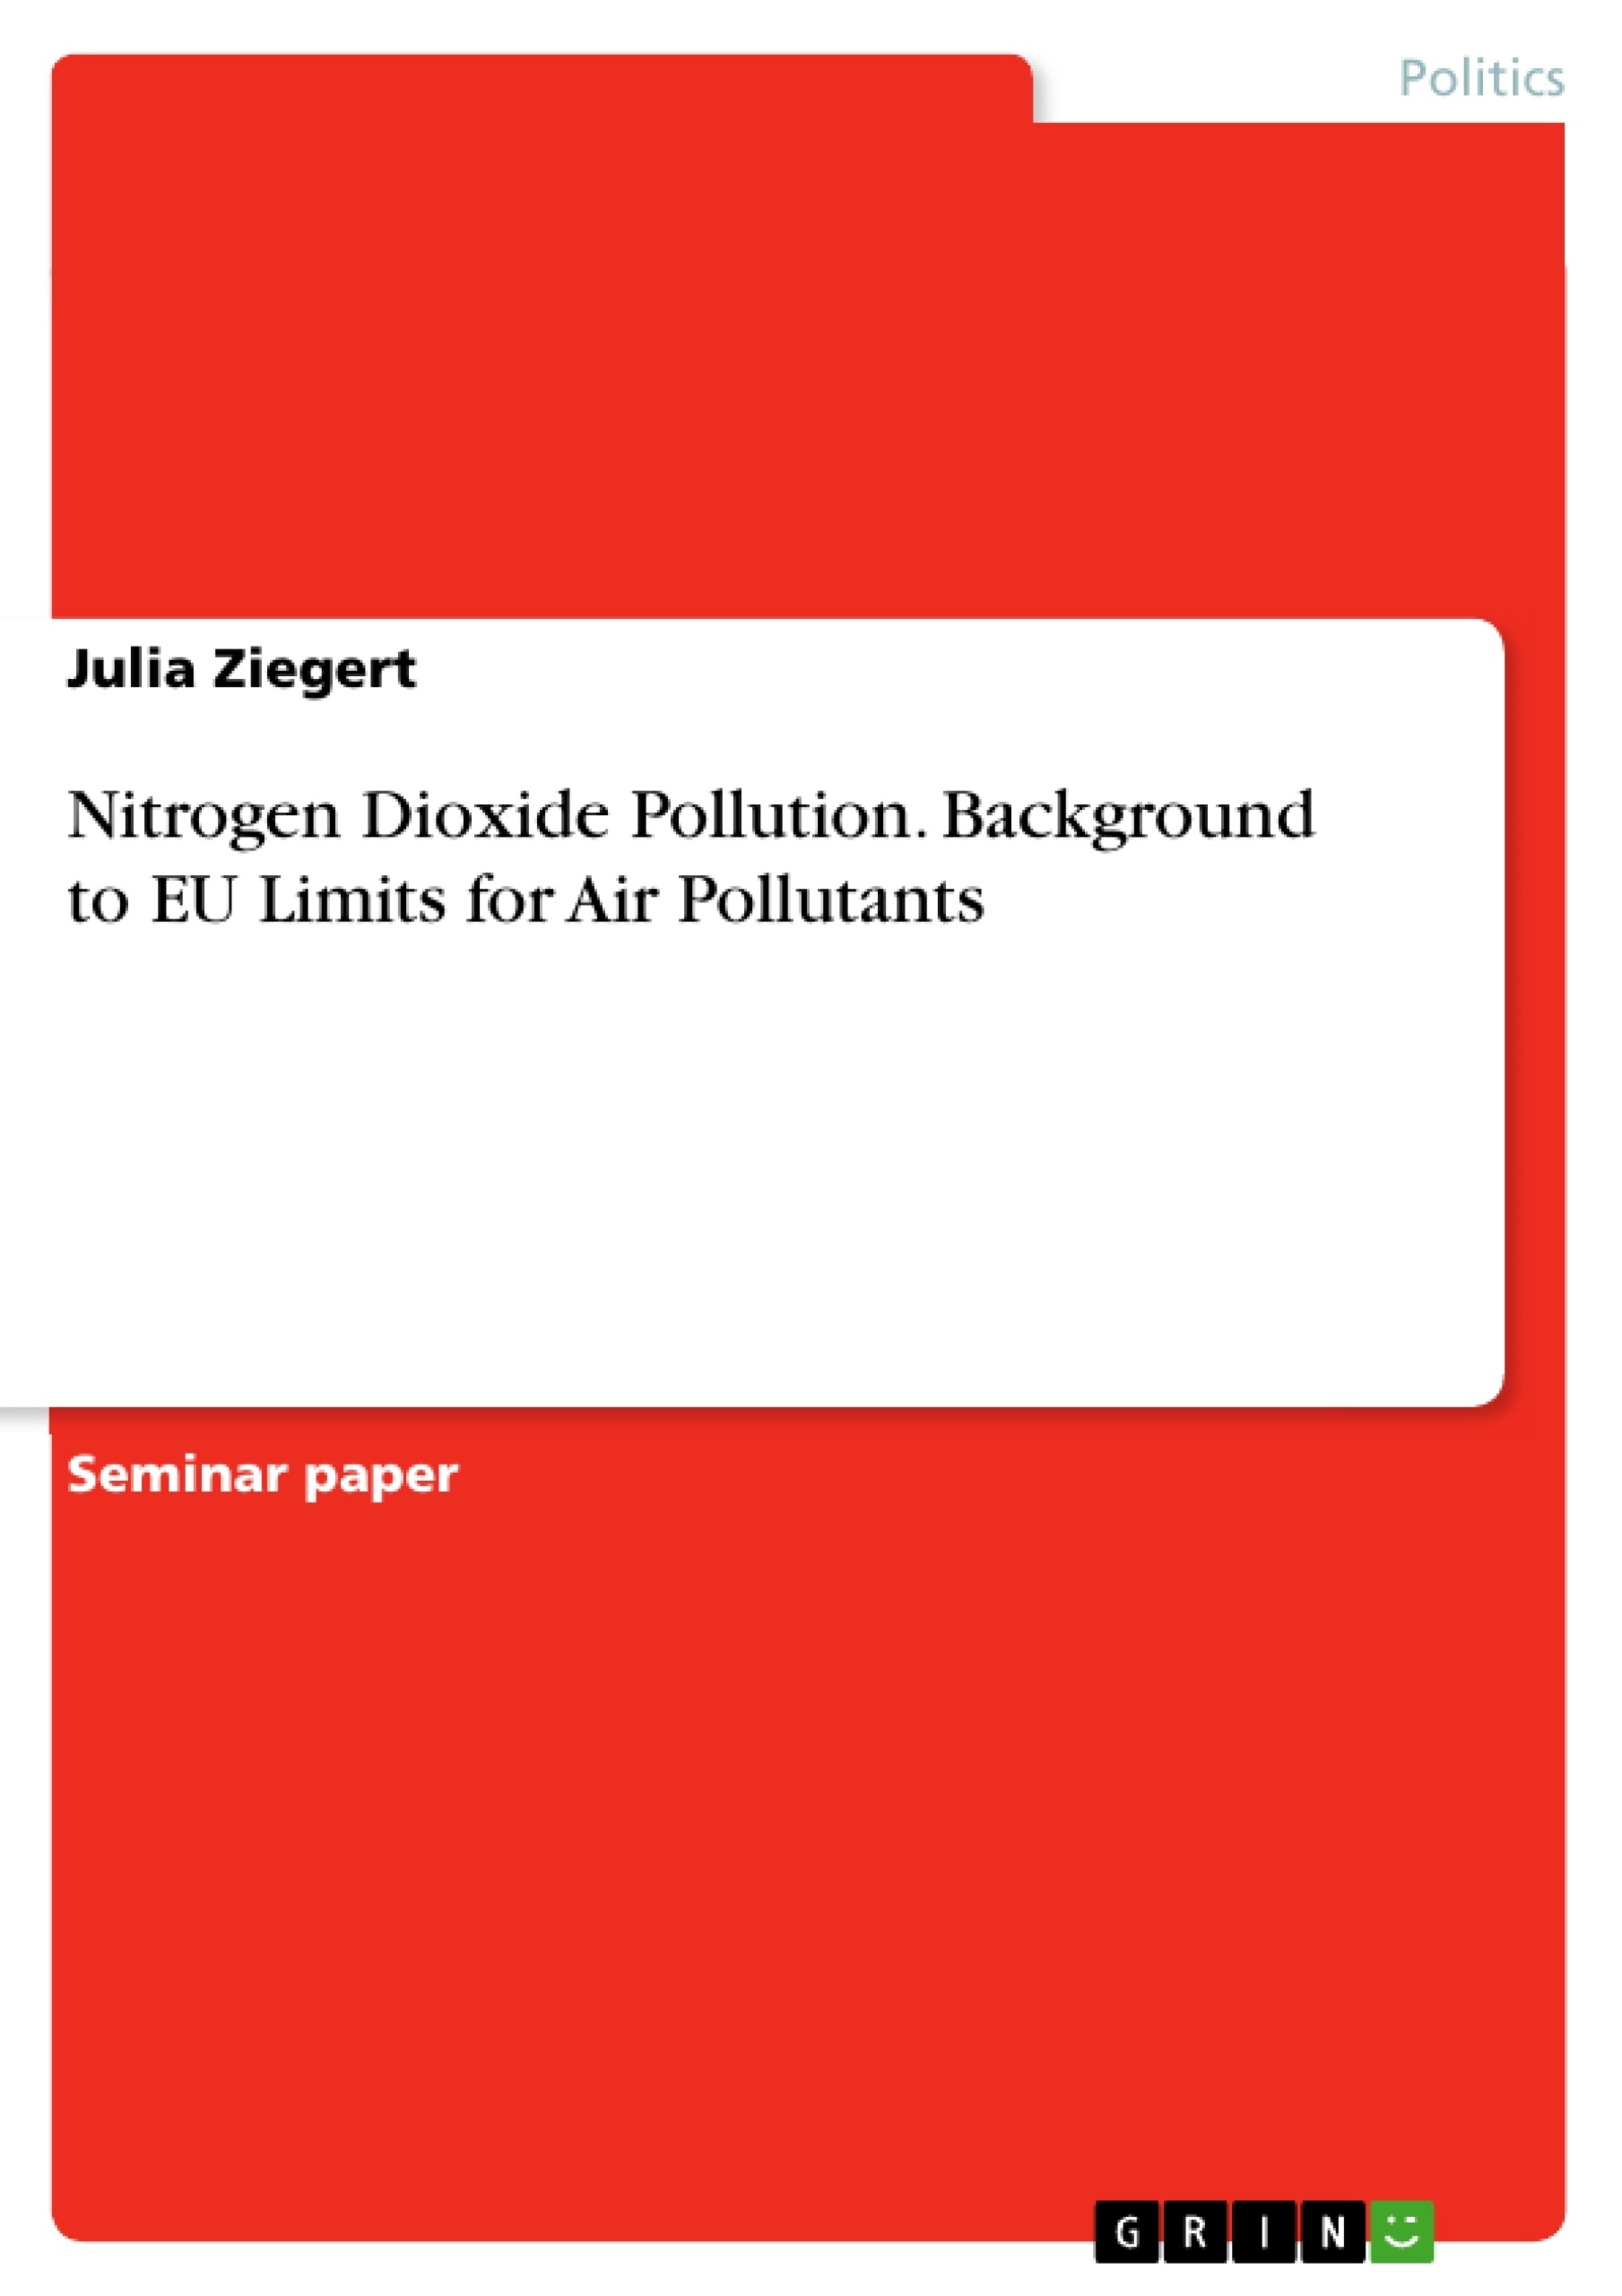 Title: Nitrogen Dioxide Pollution. Background to EU Limits for Air Pollutants